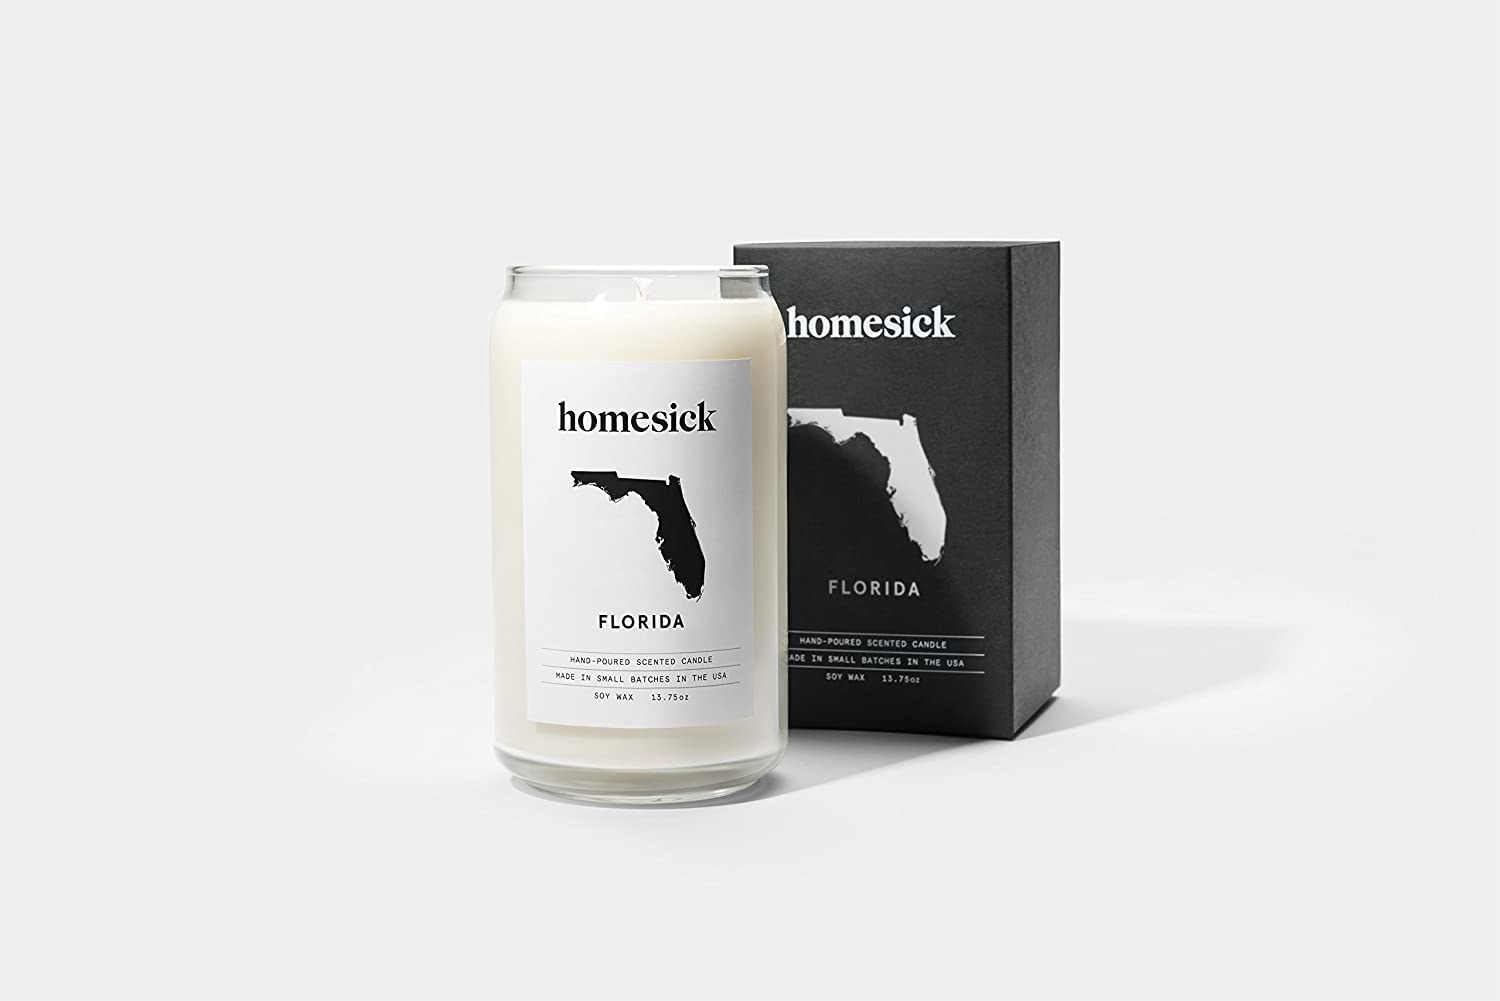 The candle, which has a picture of Florida on it